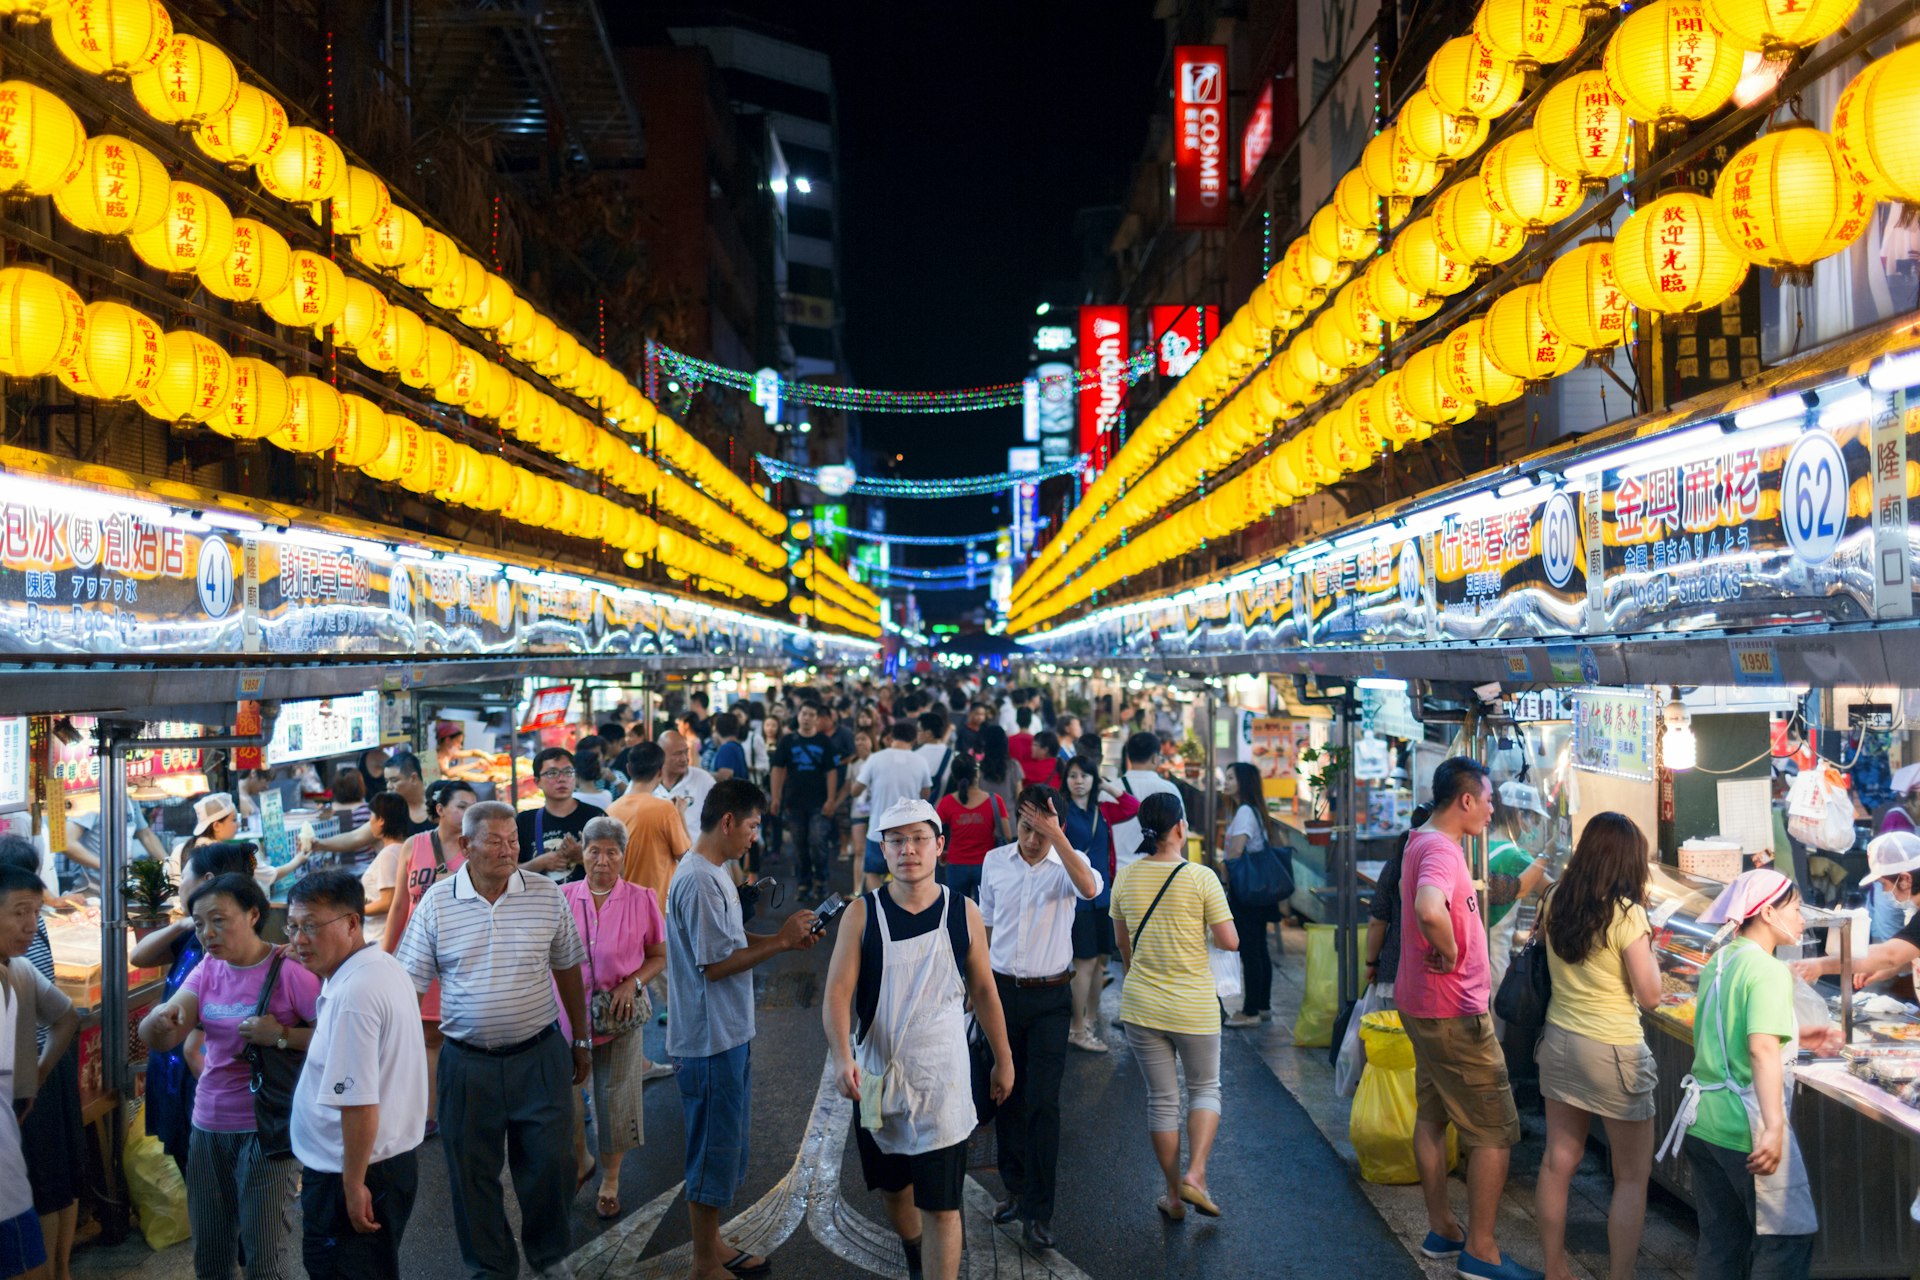 Keelung's lively Miaokou night market, famous throughout Taiwan for its seafood